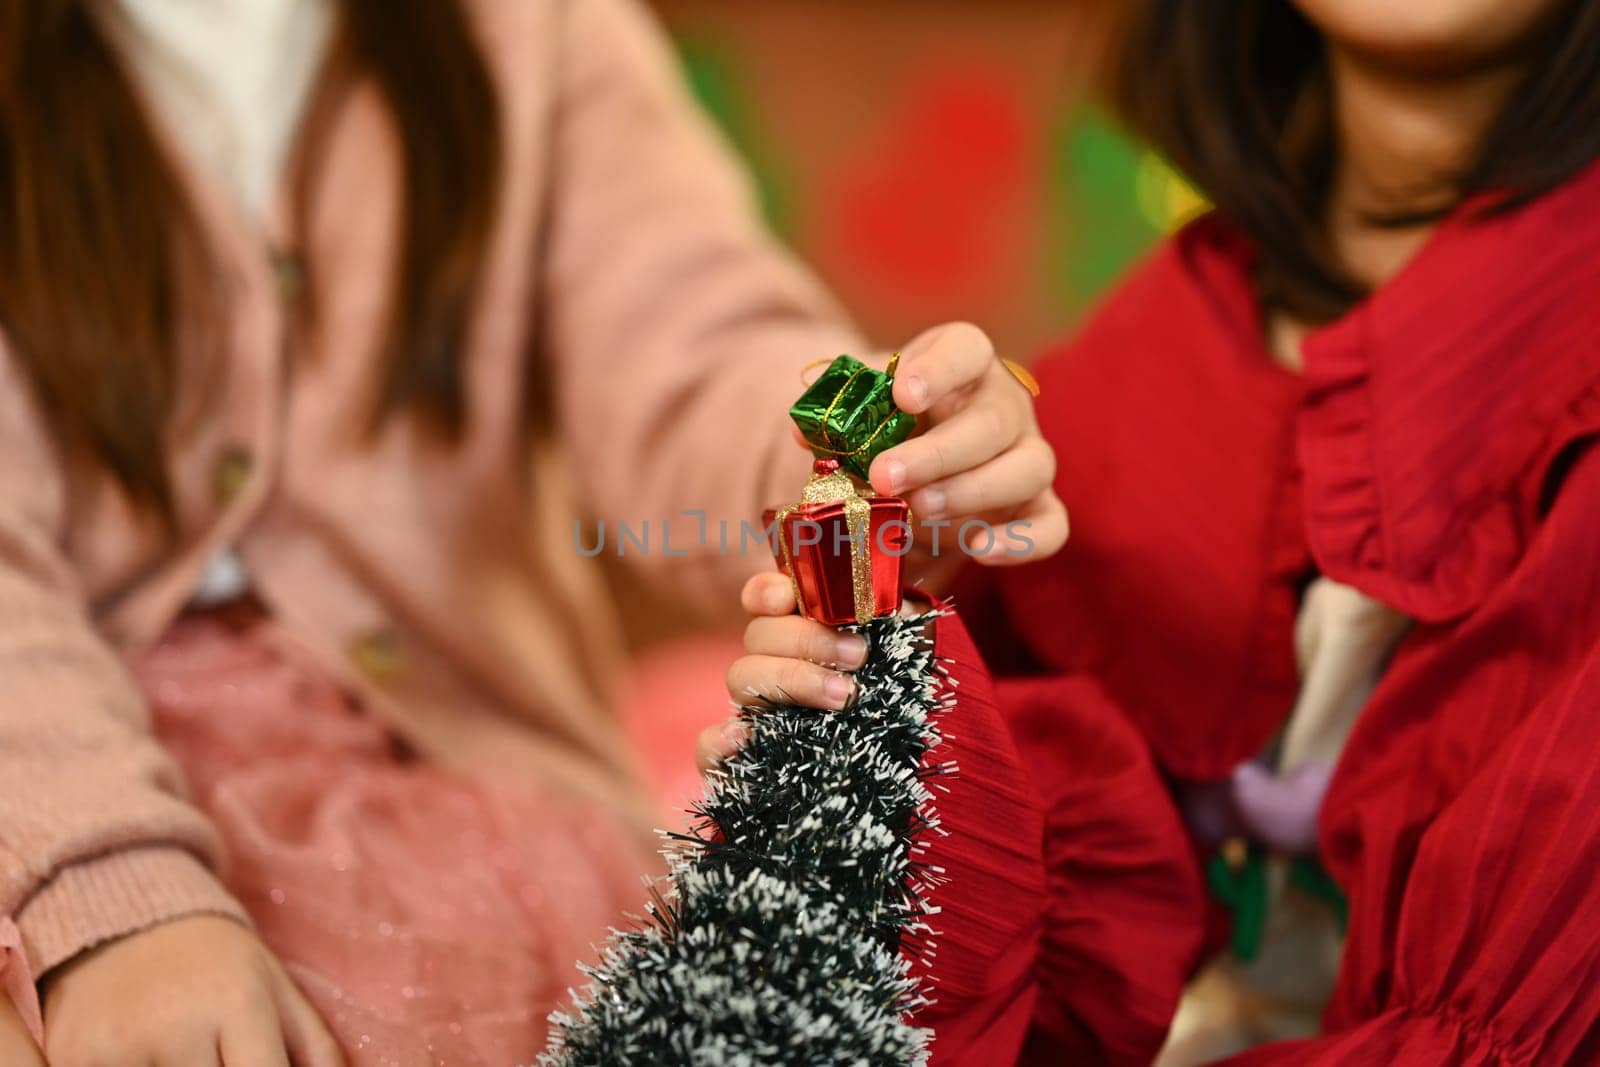 Two little children wearing warm winter clothes decorating small Christmas tree in living room.